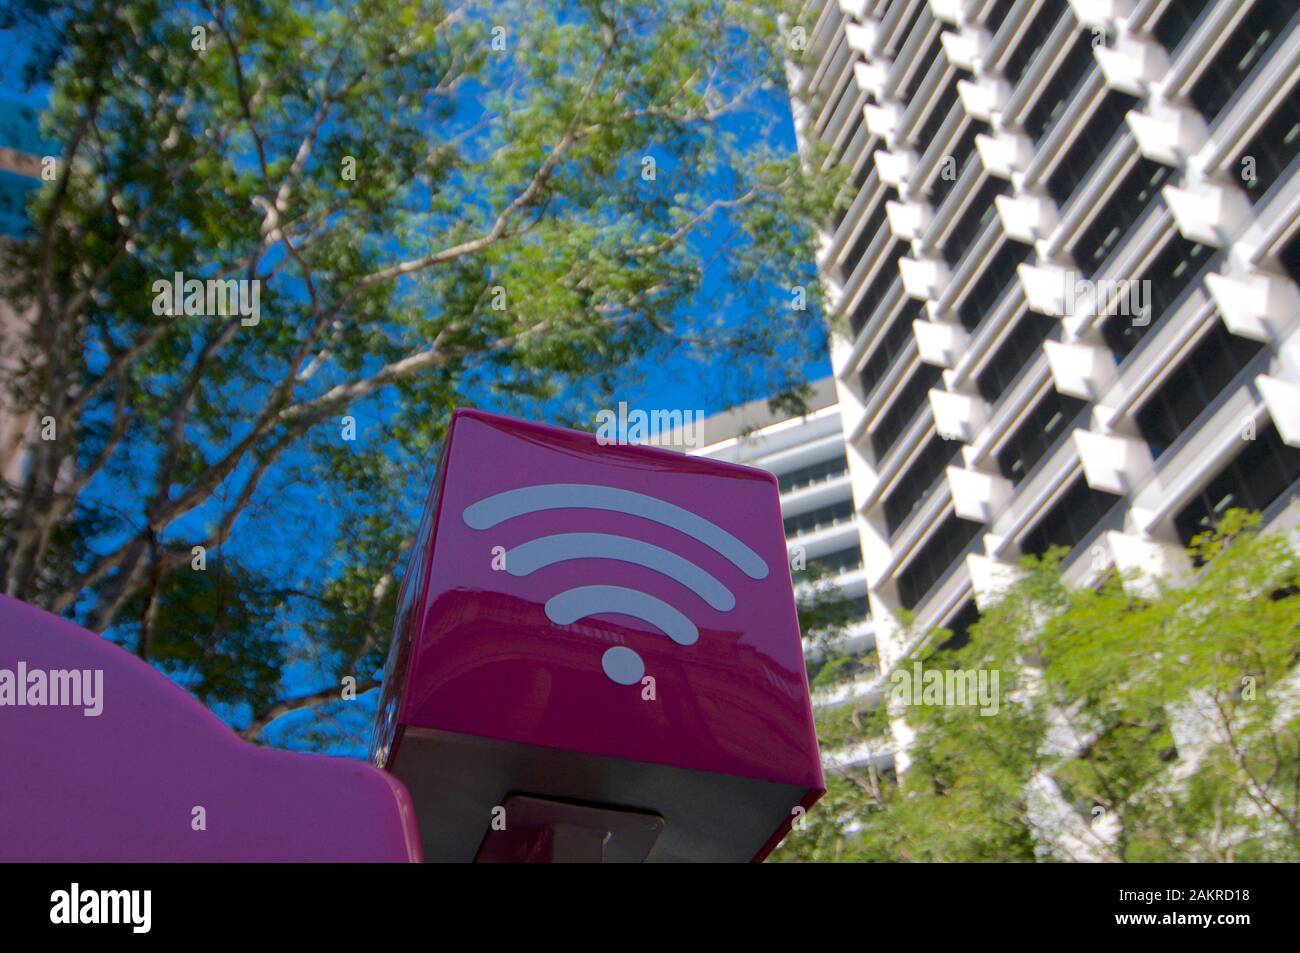 Brisbane, Queensland, Australia - 7th November 2019 : Purple colored WiFi sign of the Telstra company installed on the top of a phone booth in the cit Stock Photo